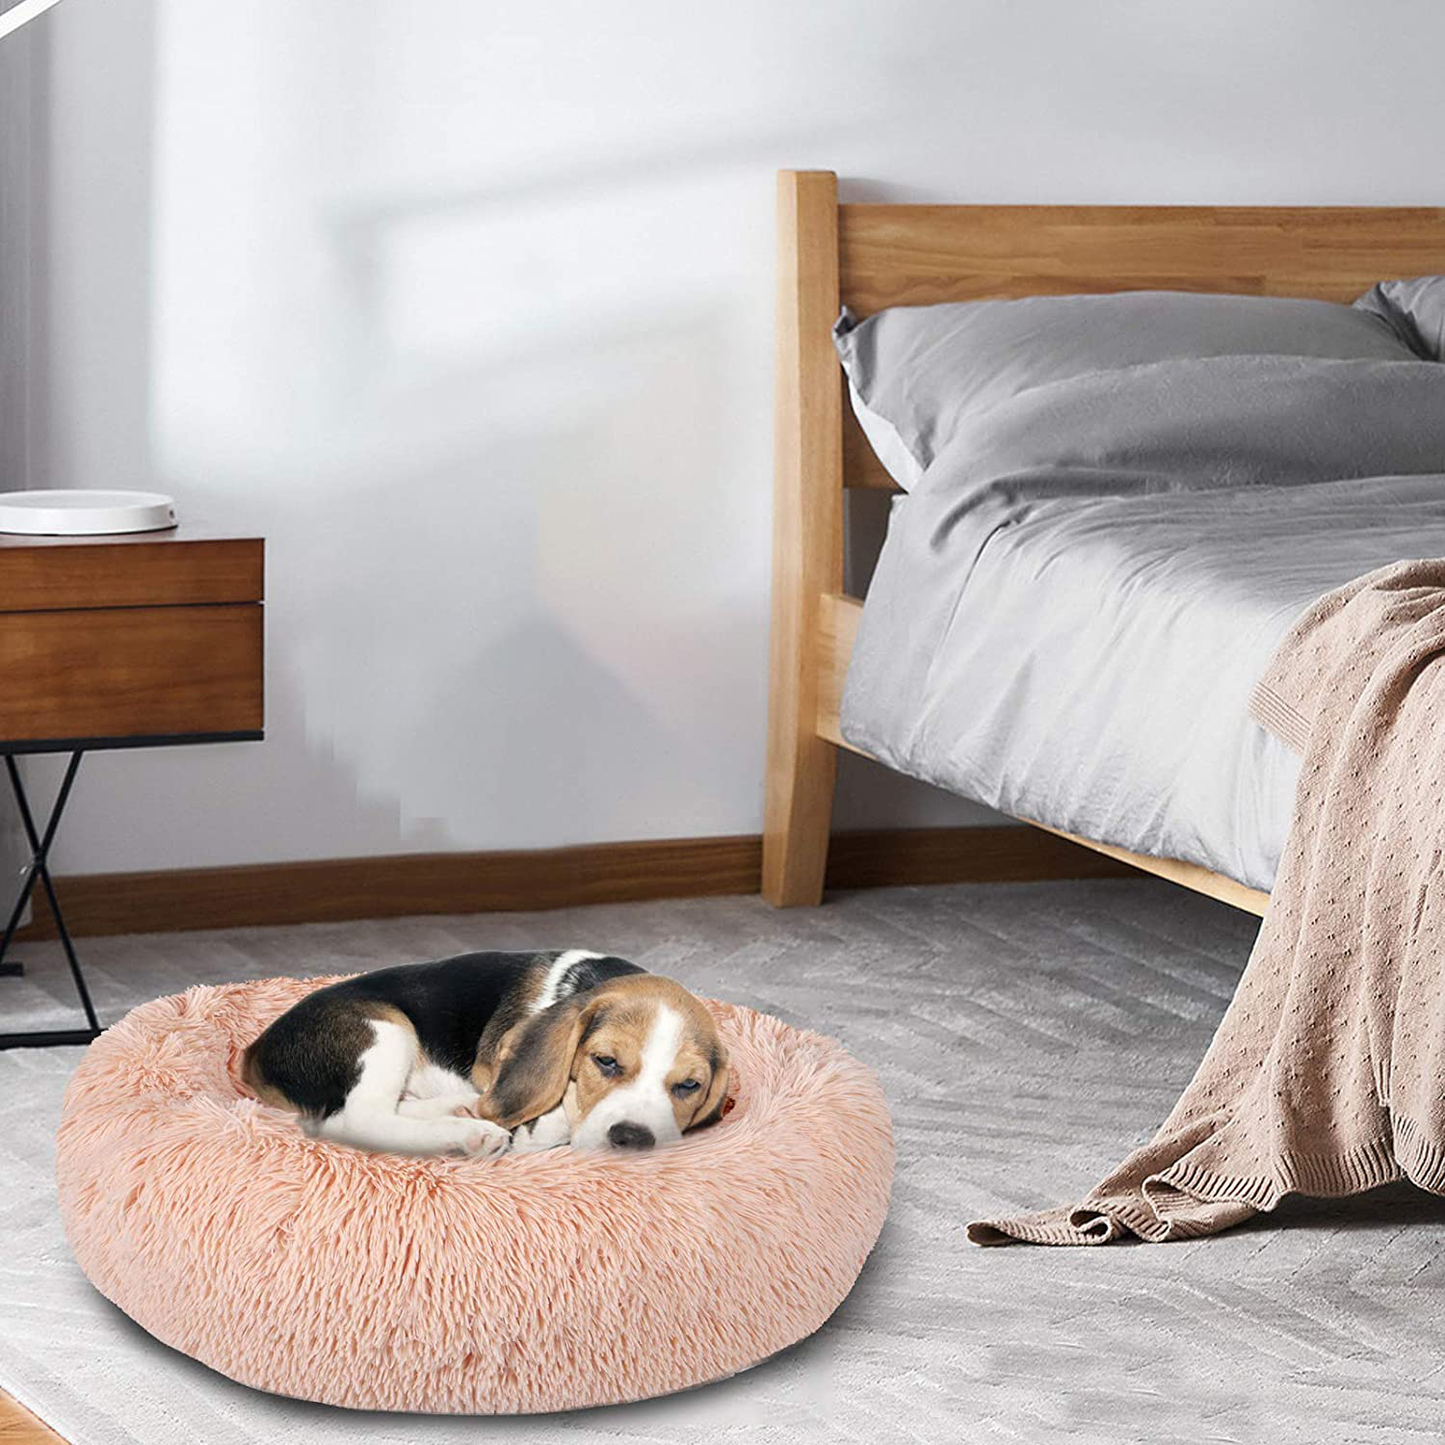 Pjyucien Calming Dog Bed Cat Bed, Large Medium Small Pet Beds, Soft Cozy Donut Cuddler round Plush Beds for Dogs Cats, Waterproof & Anti-Slip Bottom, Machine Washable Animals & Pet Supplies > Pet Supplies > Dog Supplies > Dog Beds PJYuCien   